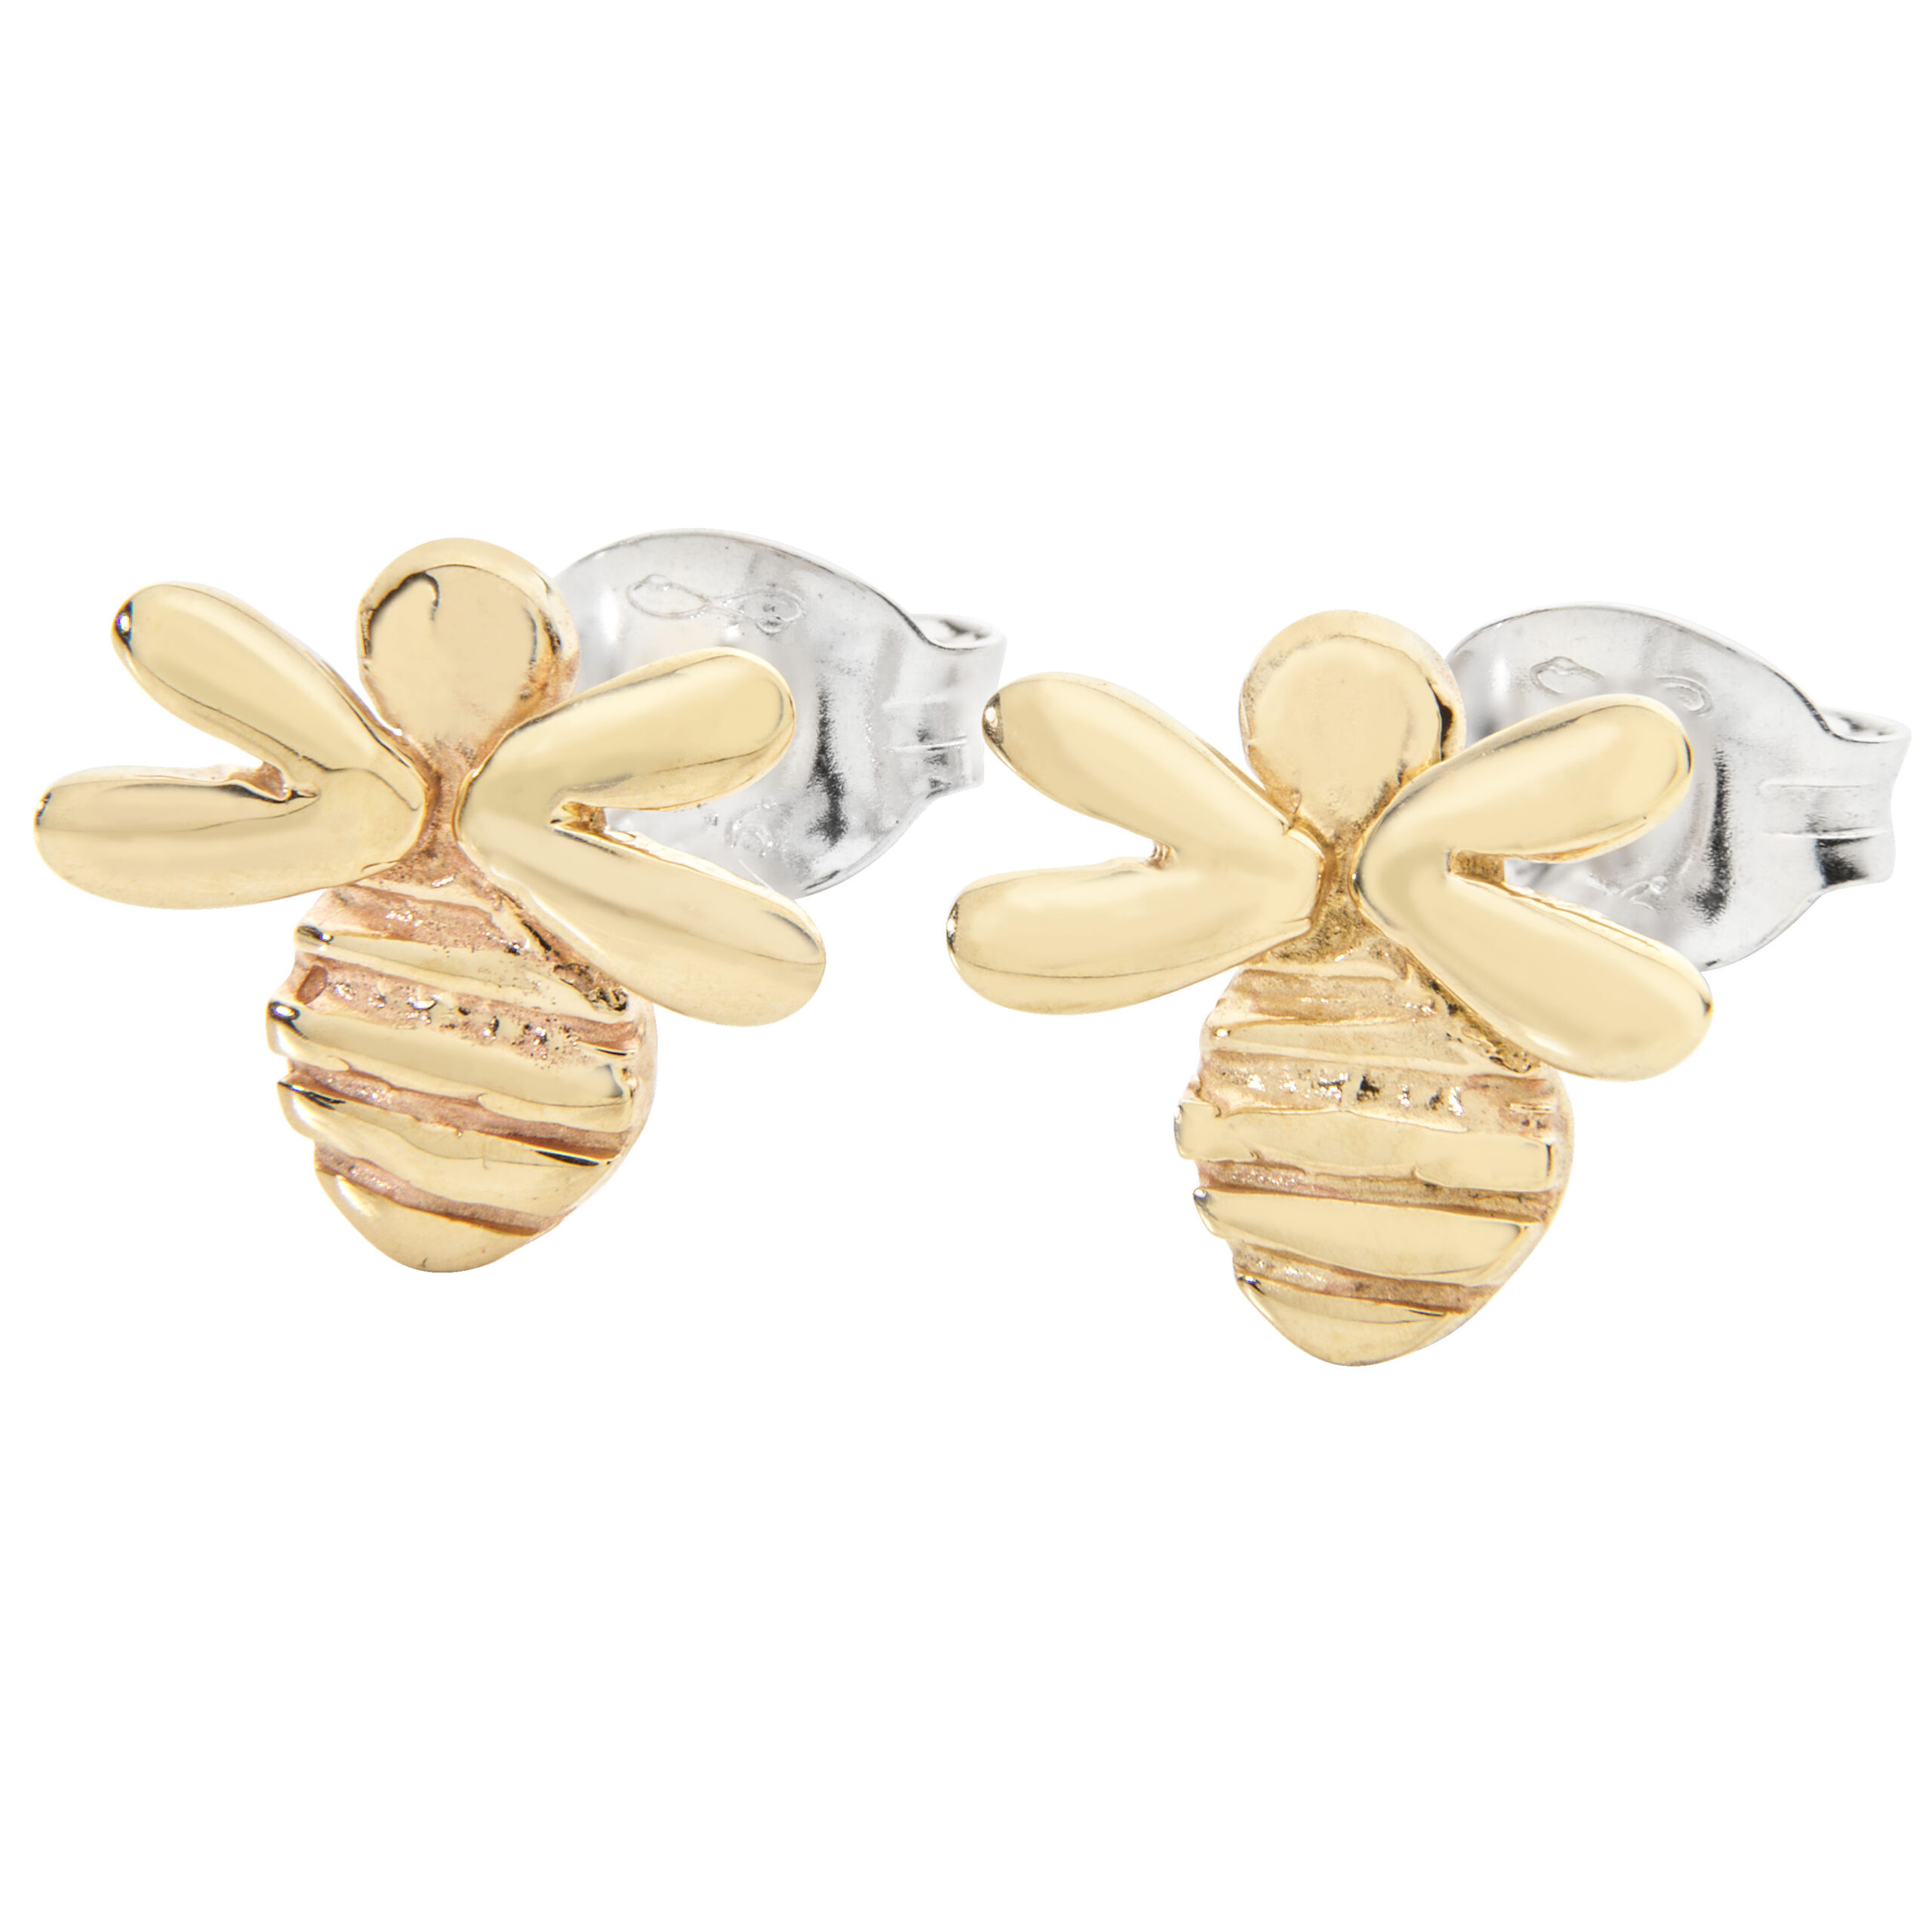 Silver and gold Bee earrings £86 from Sally Thorntons Jewellery blog from AA Thornton jeweller Kettering Northampton 